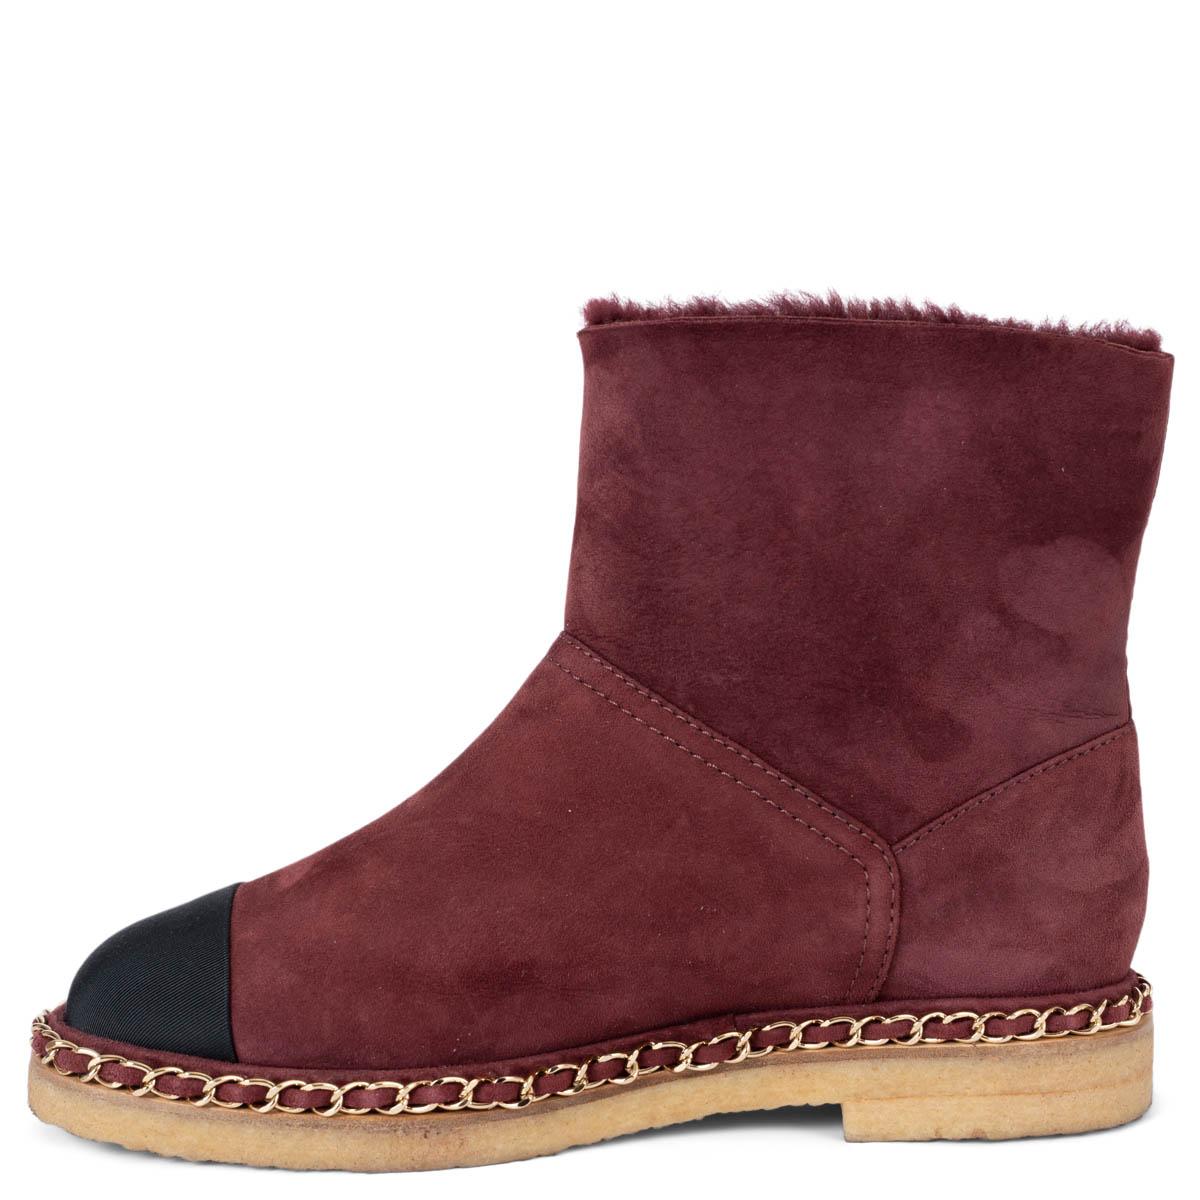 Women's CHANEL burgundy suede 2019 19B SHEARLING LINED Boots Shoes 37 For Sale